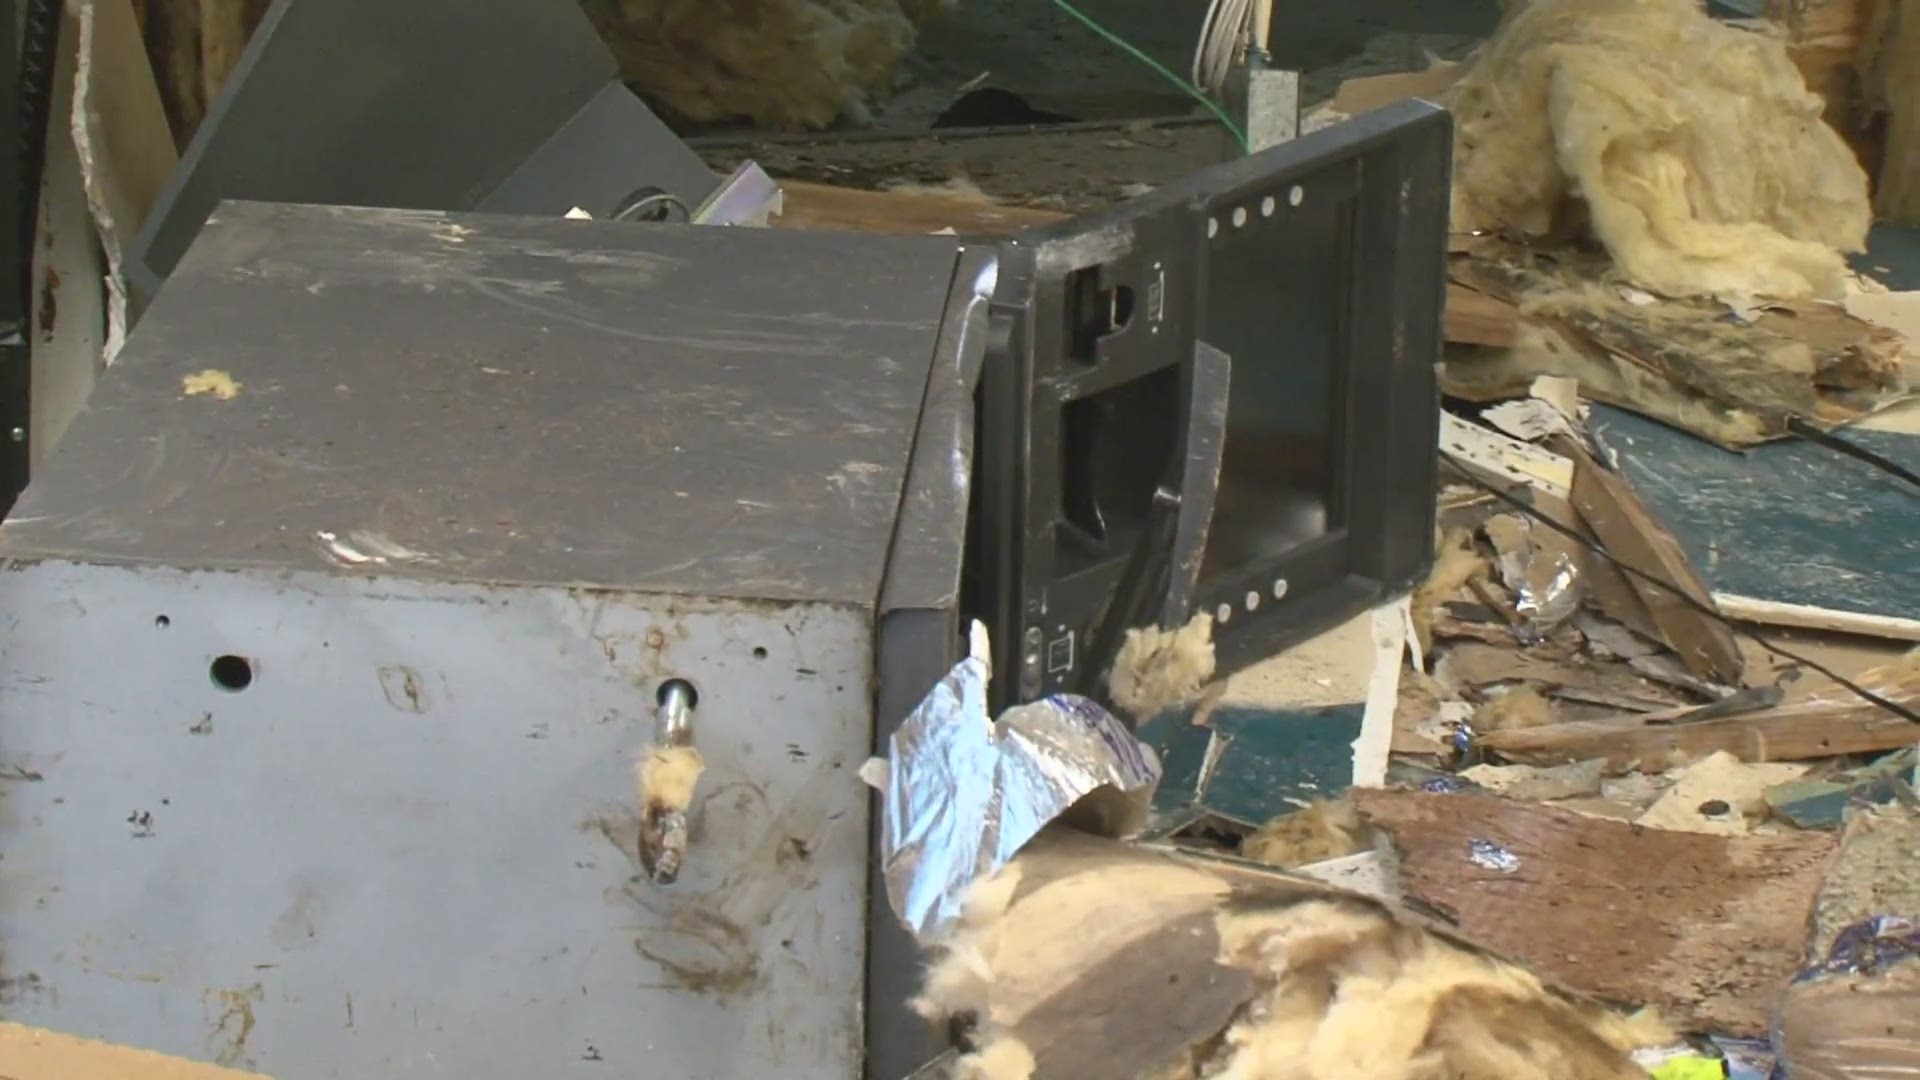 A gas station clerk got quite a scare when a group of suspects smashed a truck into a store to steal the ATM inside overnight.